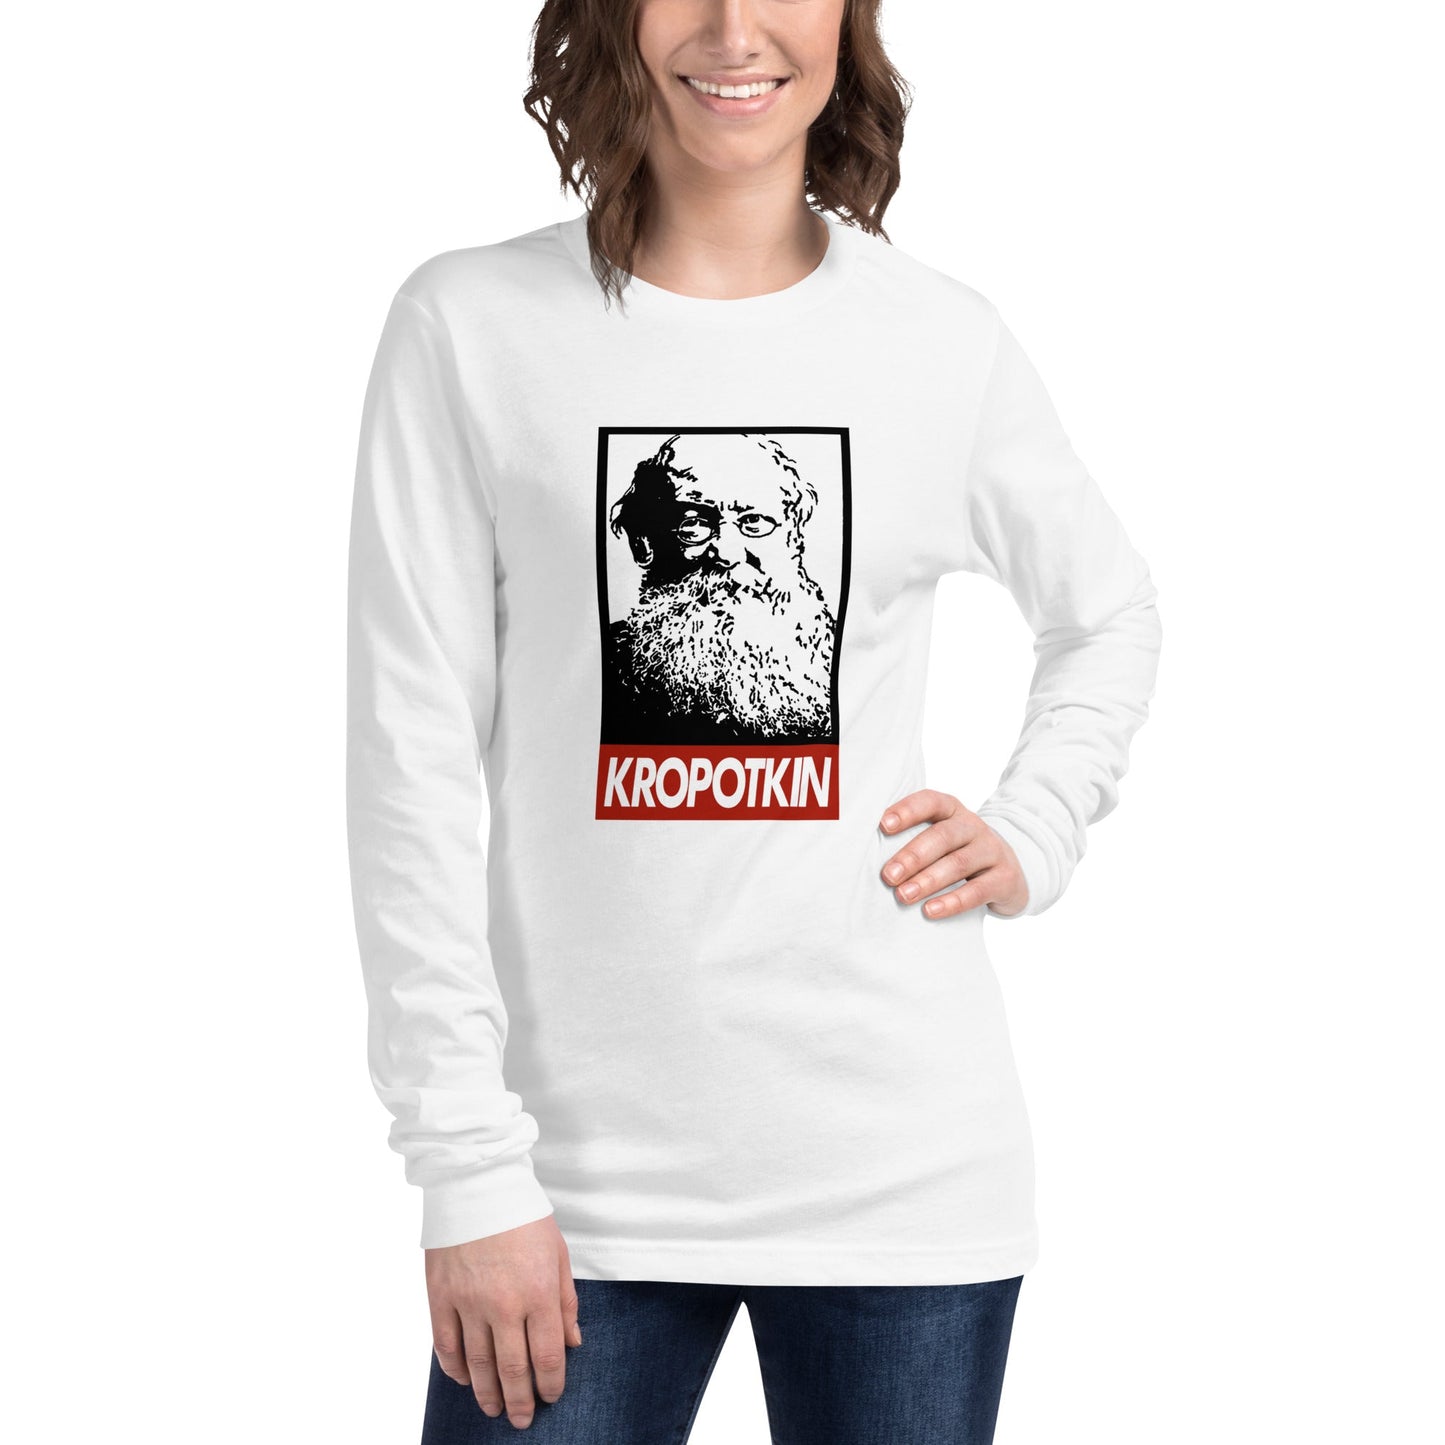 Kropotkin - Unisex Long Sleeve Tee - Souled Out World